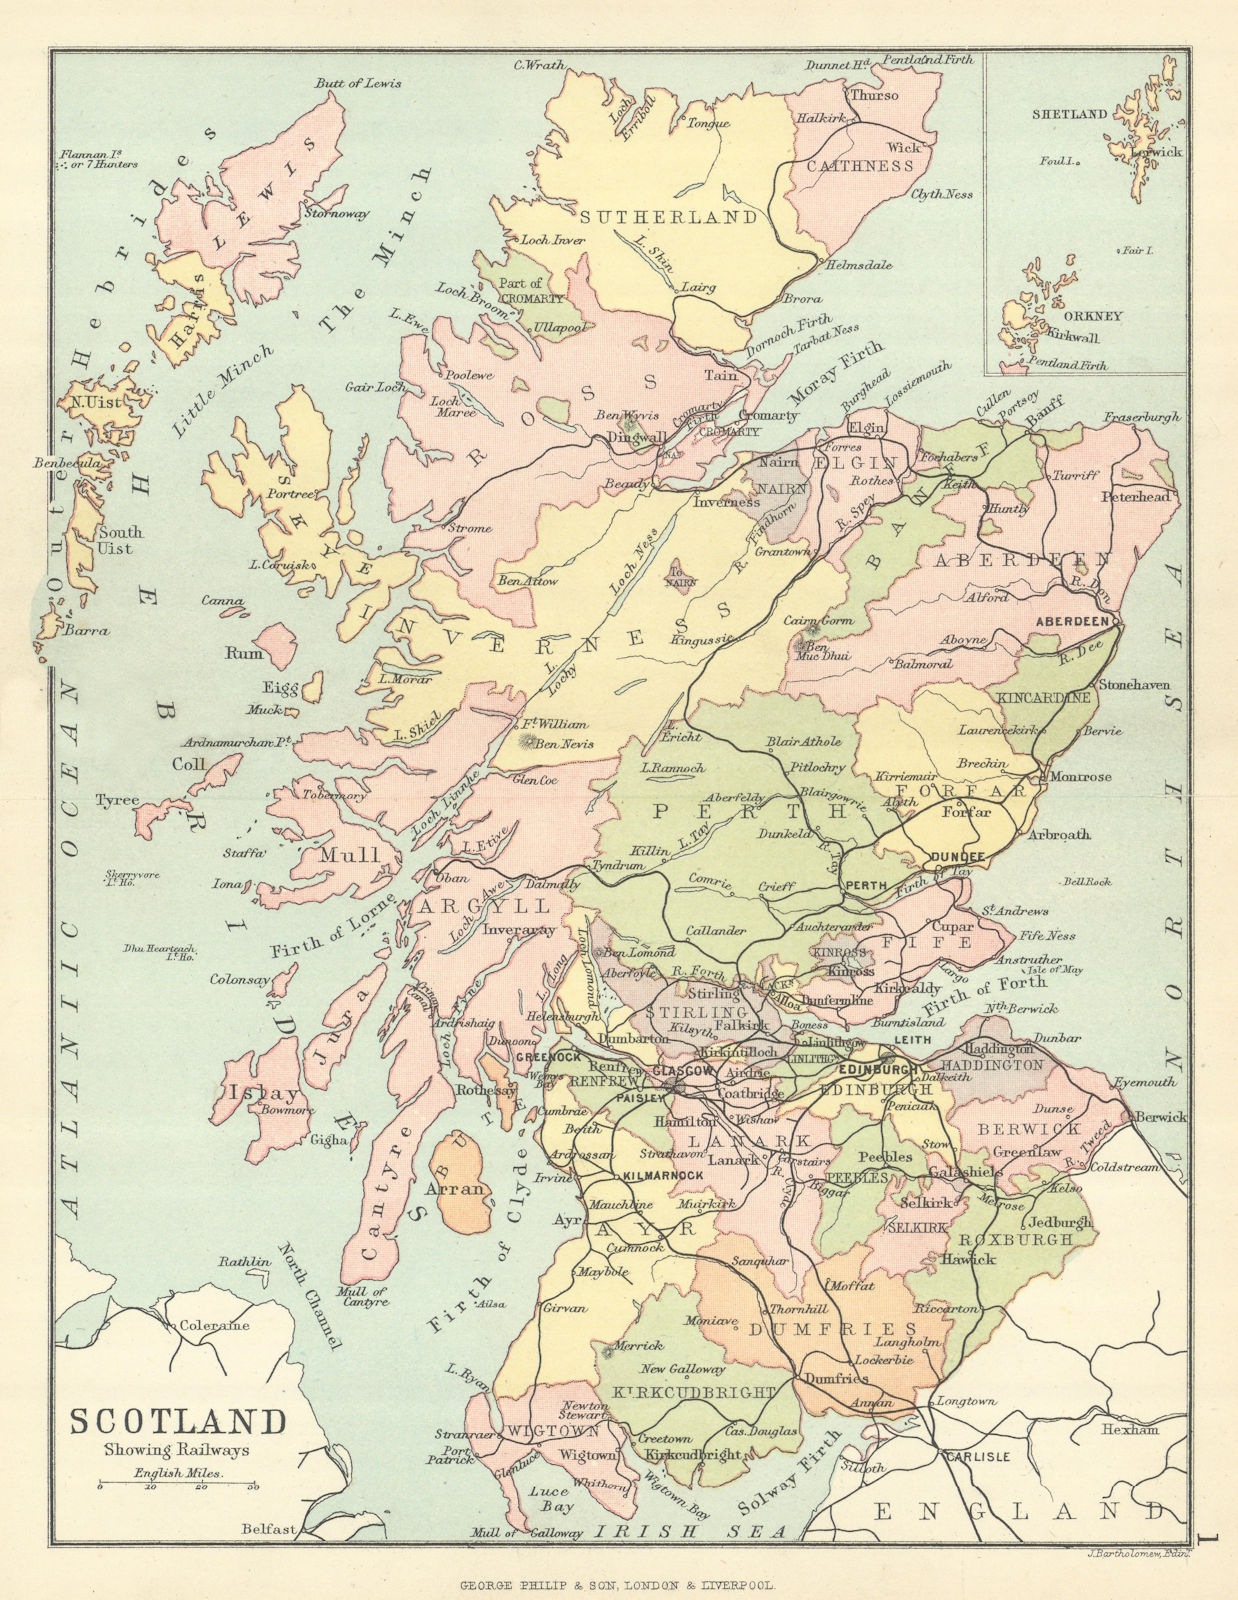 Associate Product 'Scotland showing Railways' & counties. BARTHOLOMEW 1888 old antique map chart